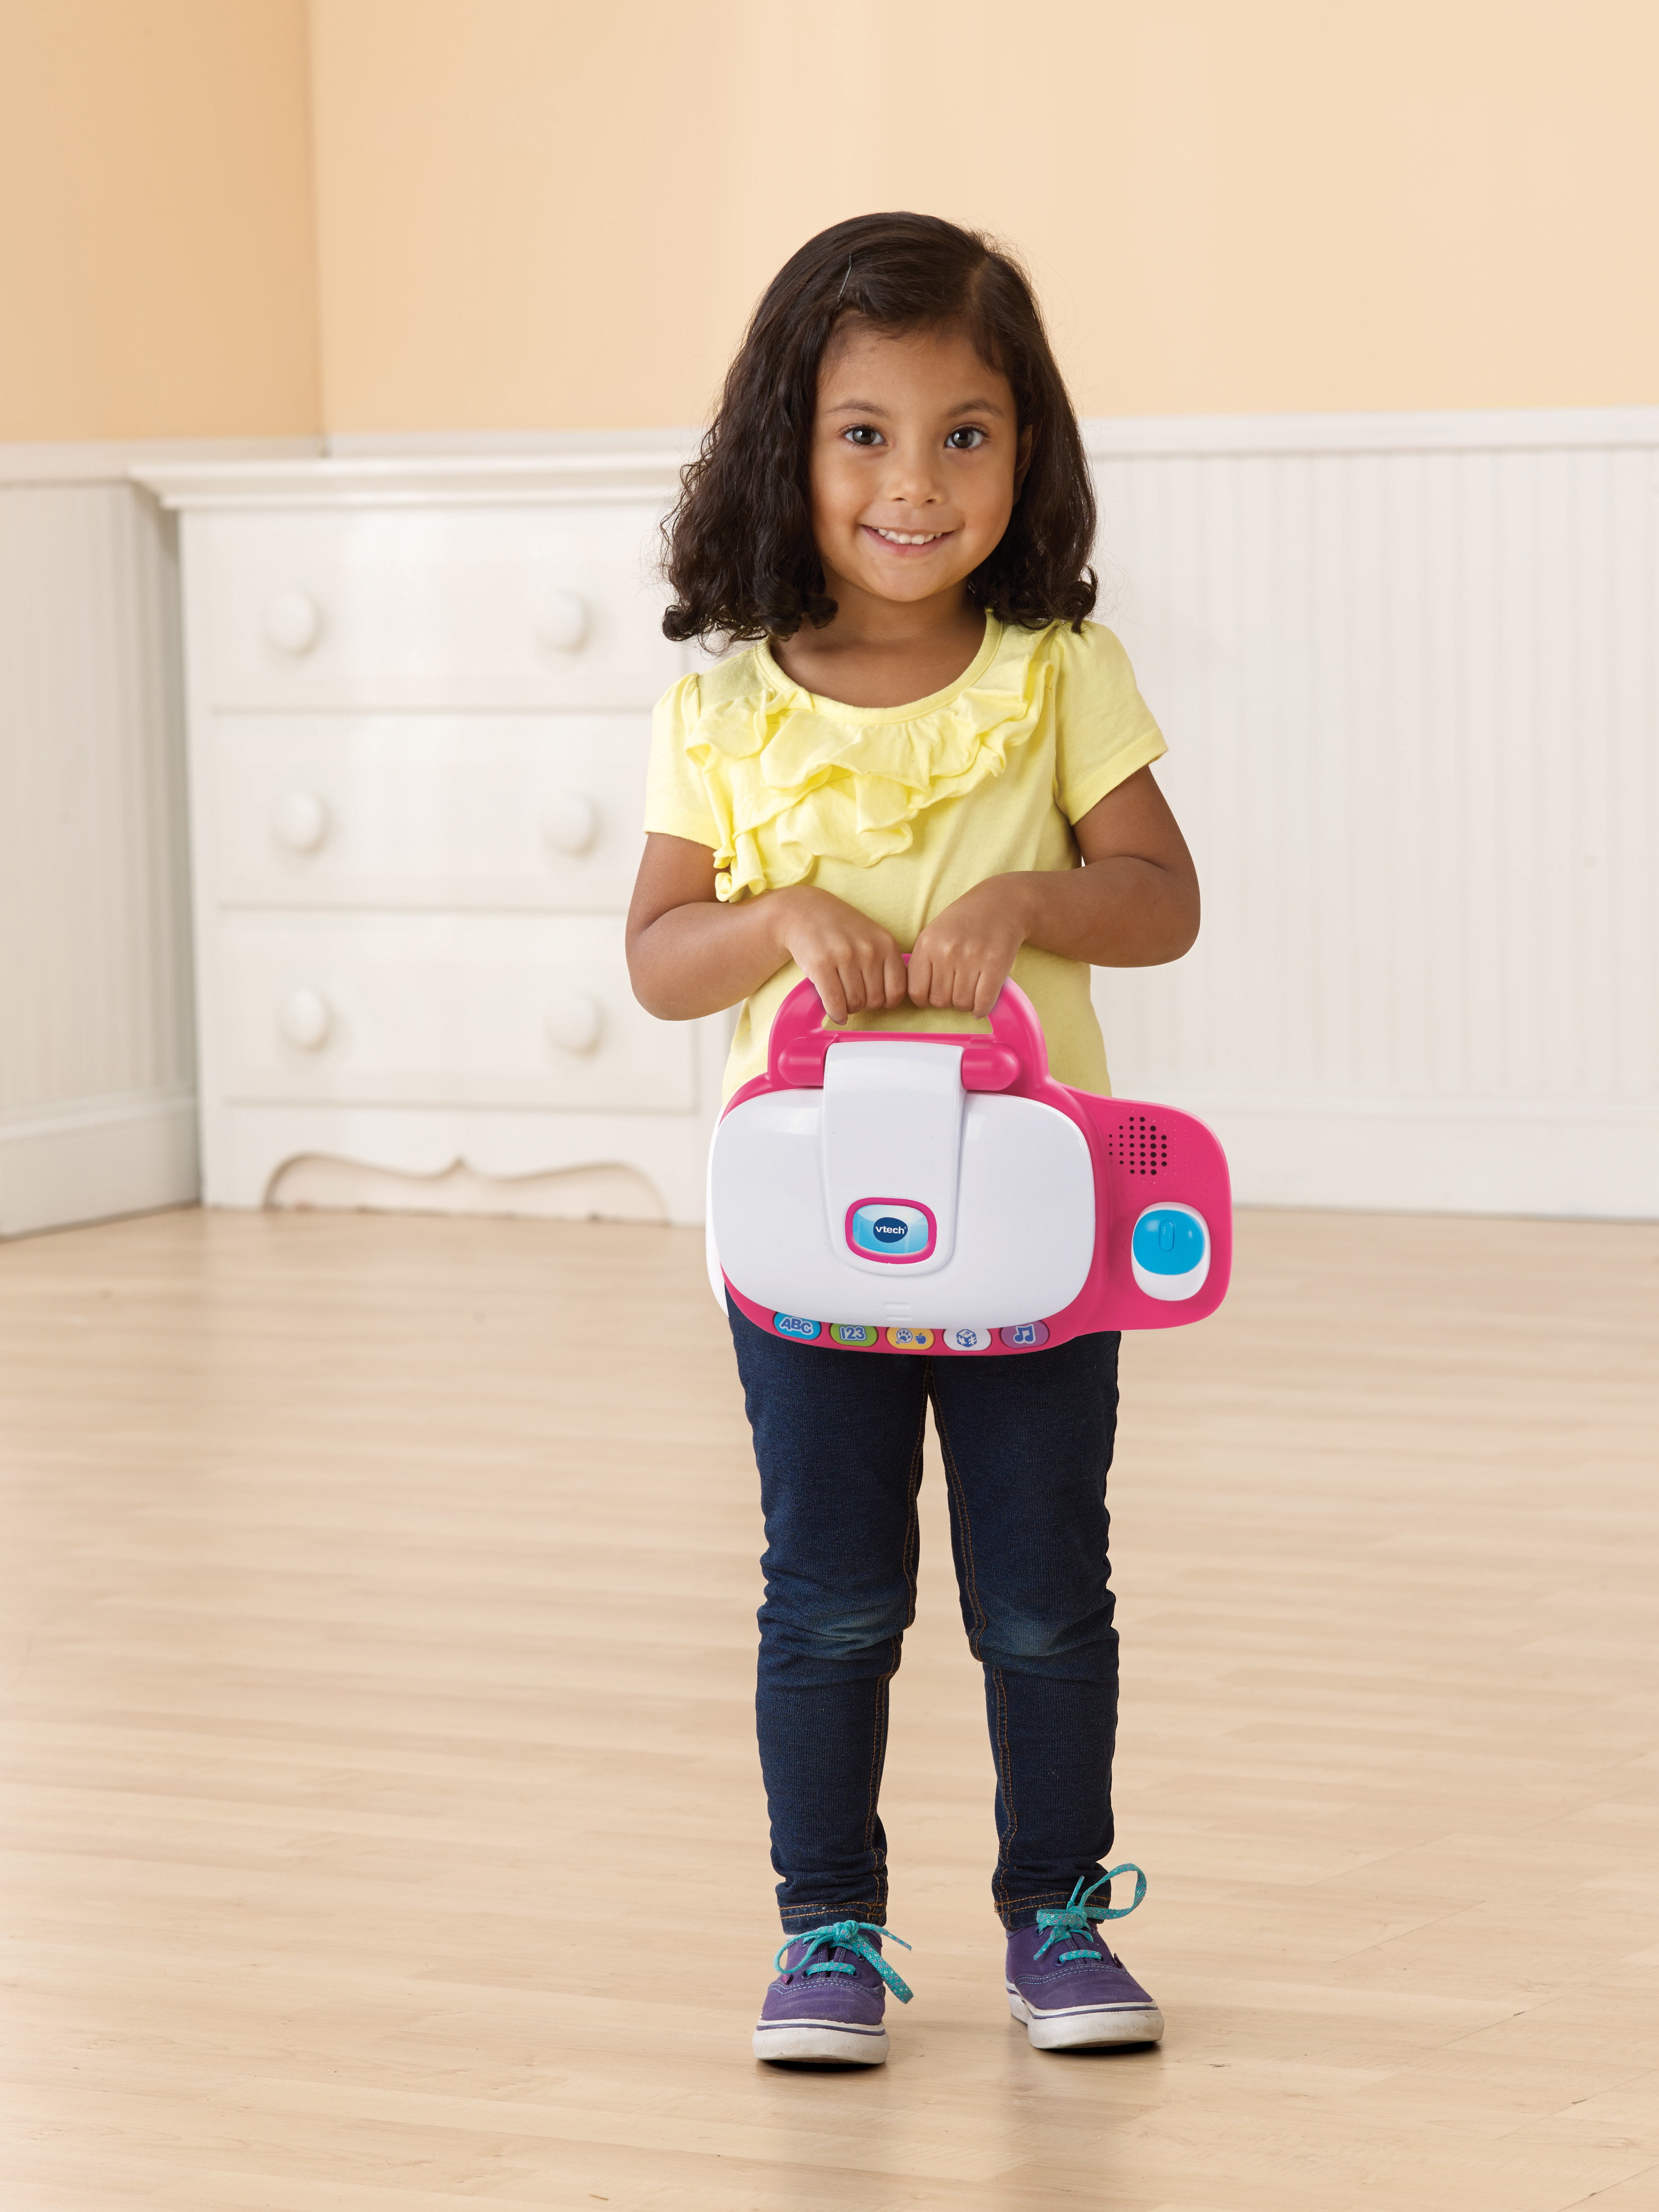 Vtech Tote 'n Go baby learning laptop~0892